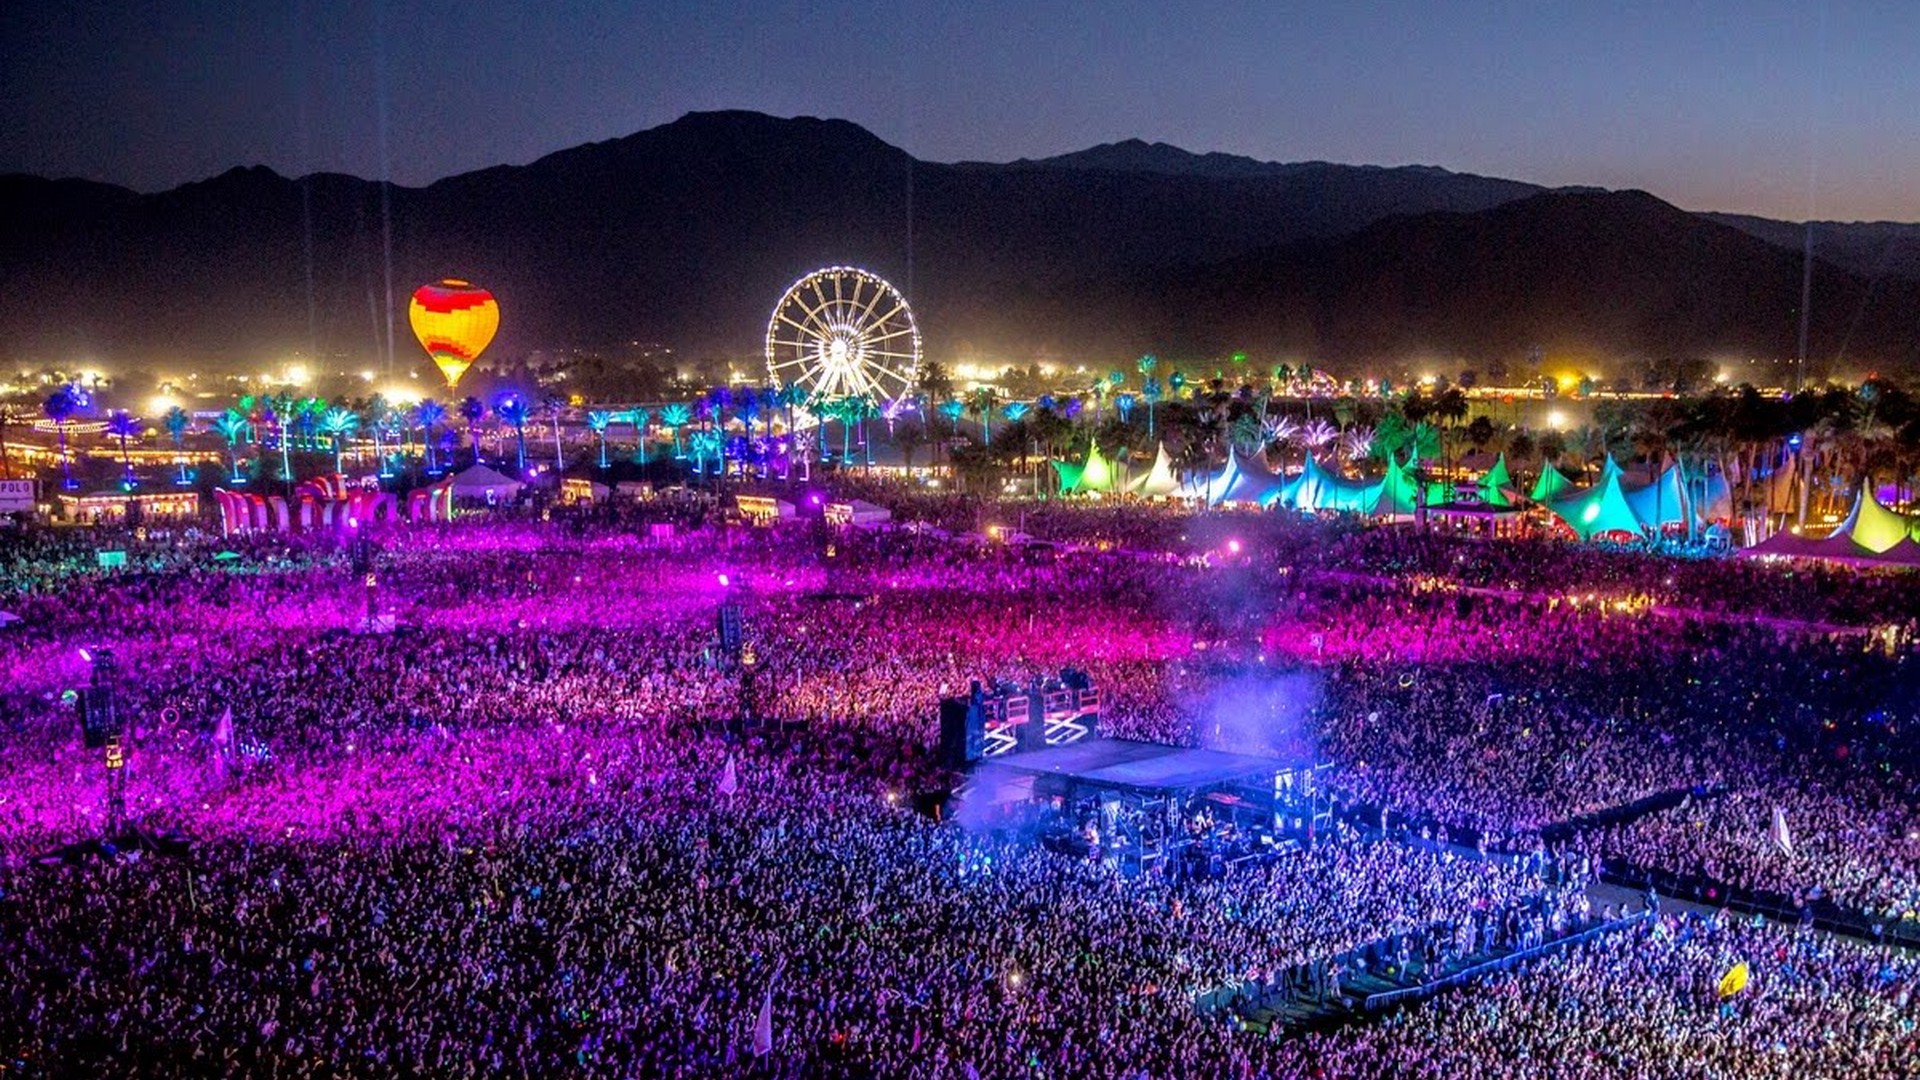 Coachella 2019 HD Wallpaper with high-resolution 1920x1080 pixel. You can use this wallpaper for your Desktop Computer Backgrounds, Mac Wallpapers, Android Lock screen or iPhone Screensavers and another smartphone device